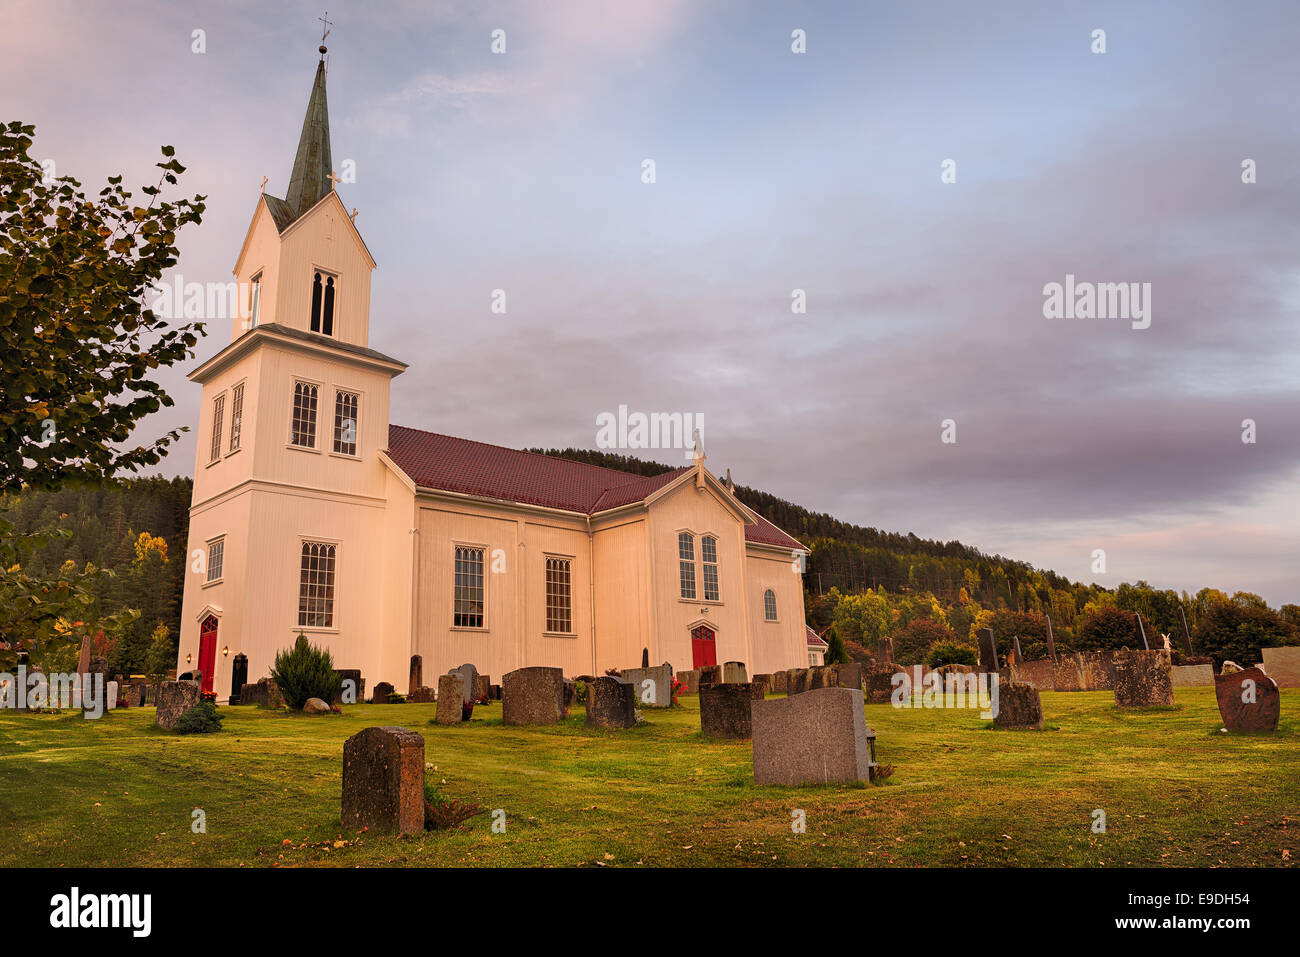 A white stave church in a Norway  village at sunset. Hdr image. Stock Photo